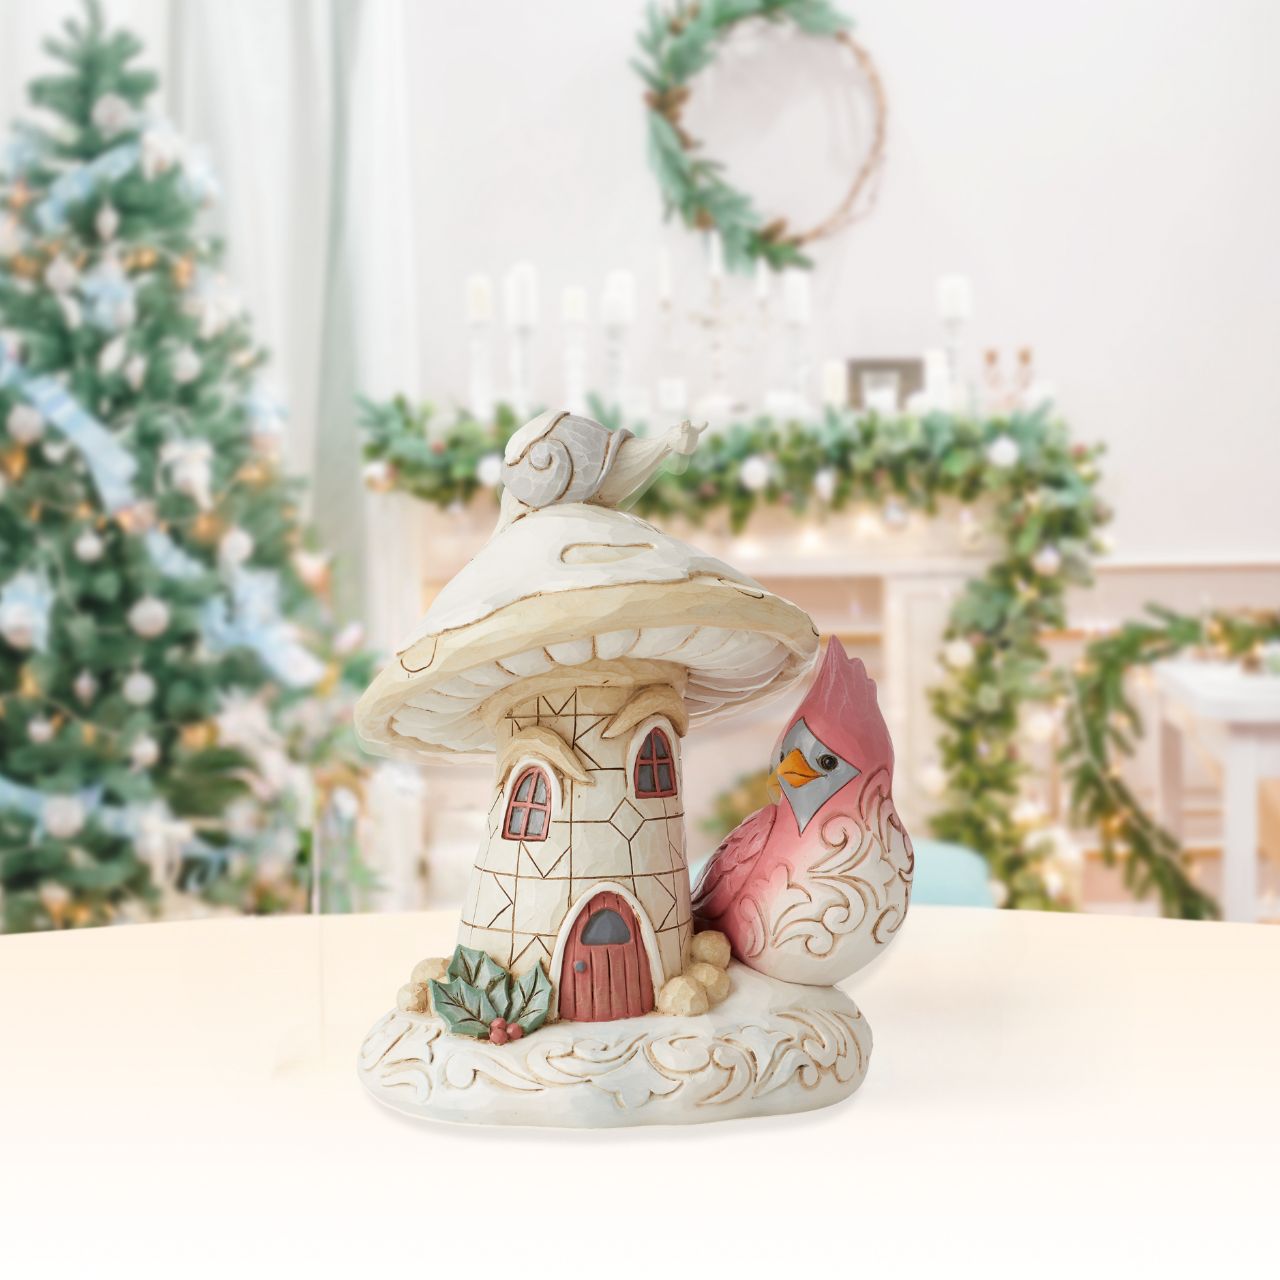 Woodland Mushroom House with Cardinal Figurine by Jim Shore  "Home For the Holidays" Designed in the iconic style of Jim Shore. This mushroom house is inhabited by woodland creatures ready to settle down in comfort for the festive season. Hand painted in high quality cast stone.